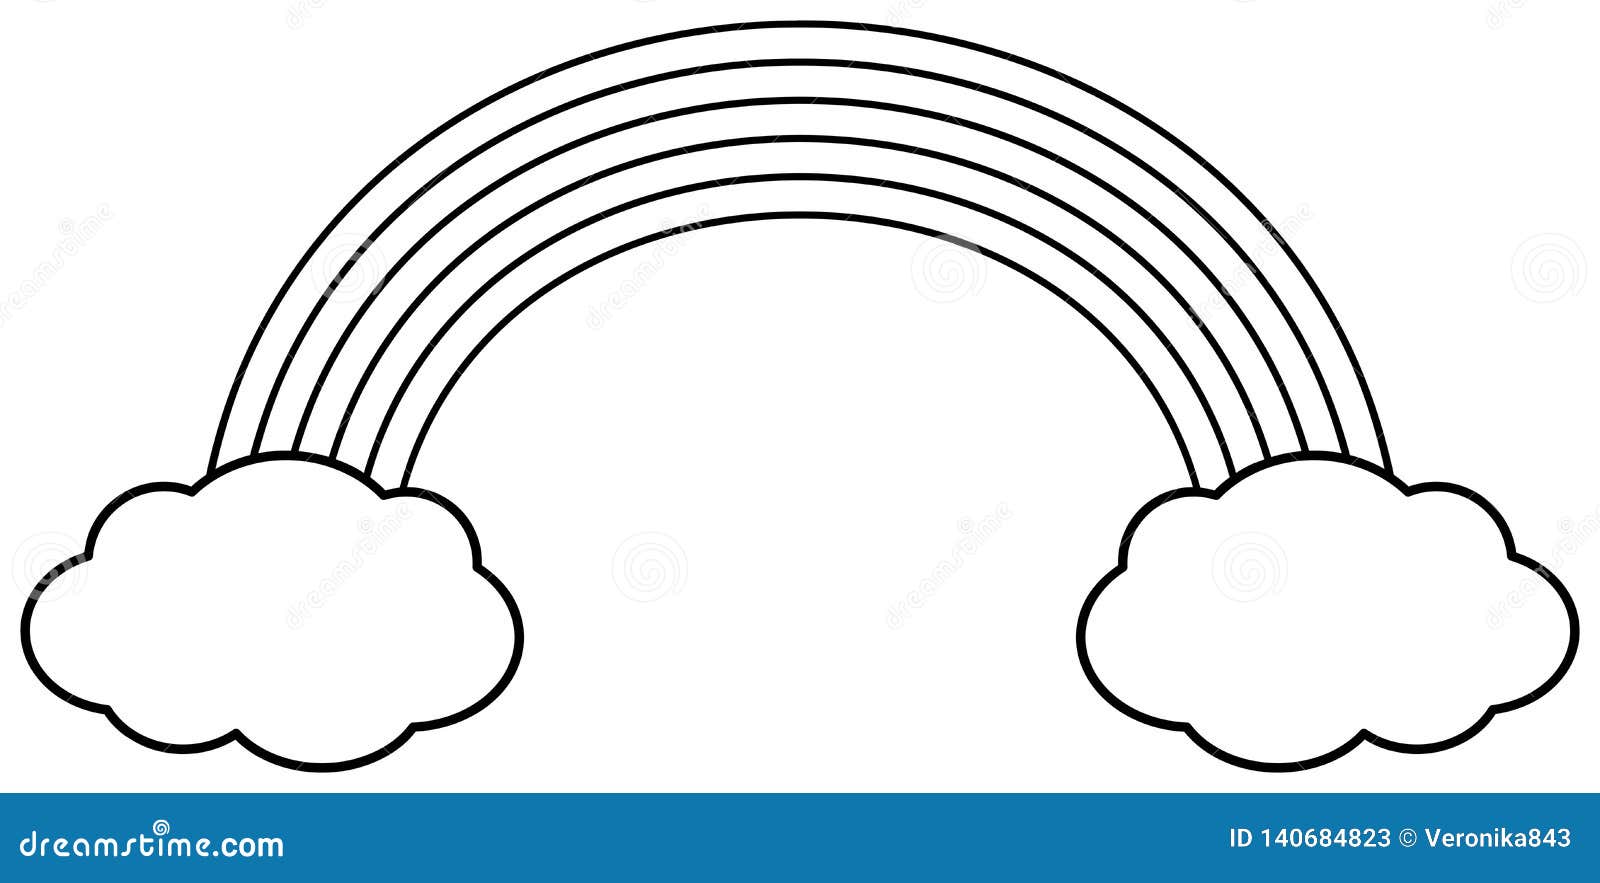 Rainbow with Clouds. Coloring Book Stock Vector - Illustration of